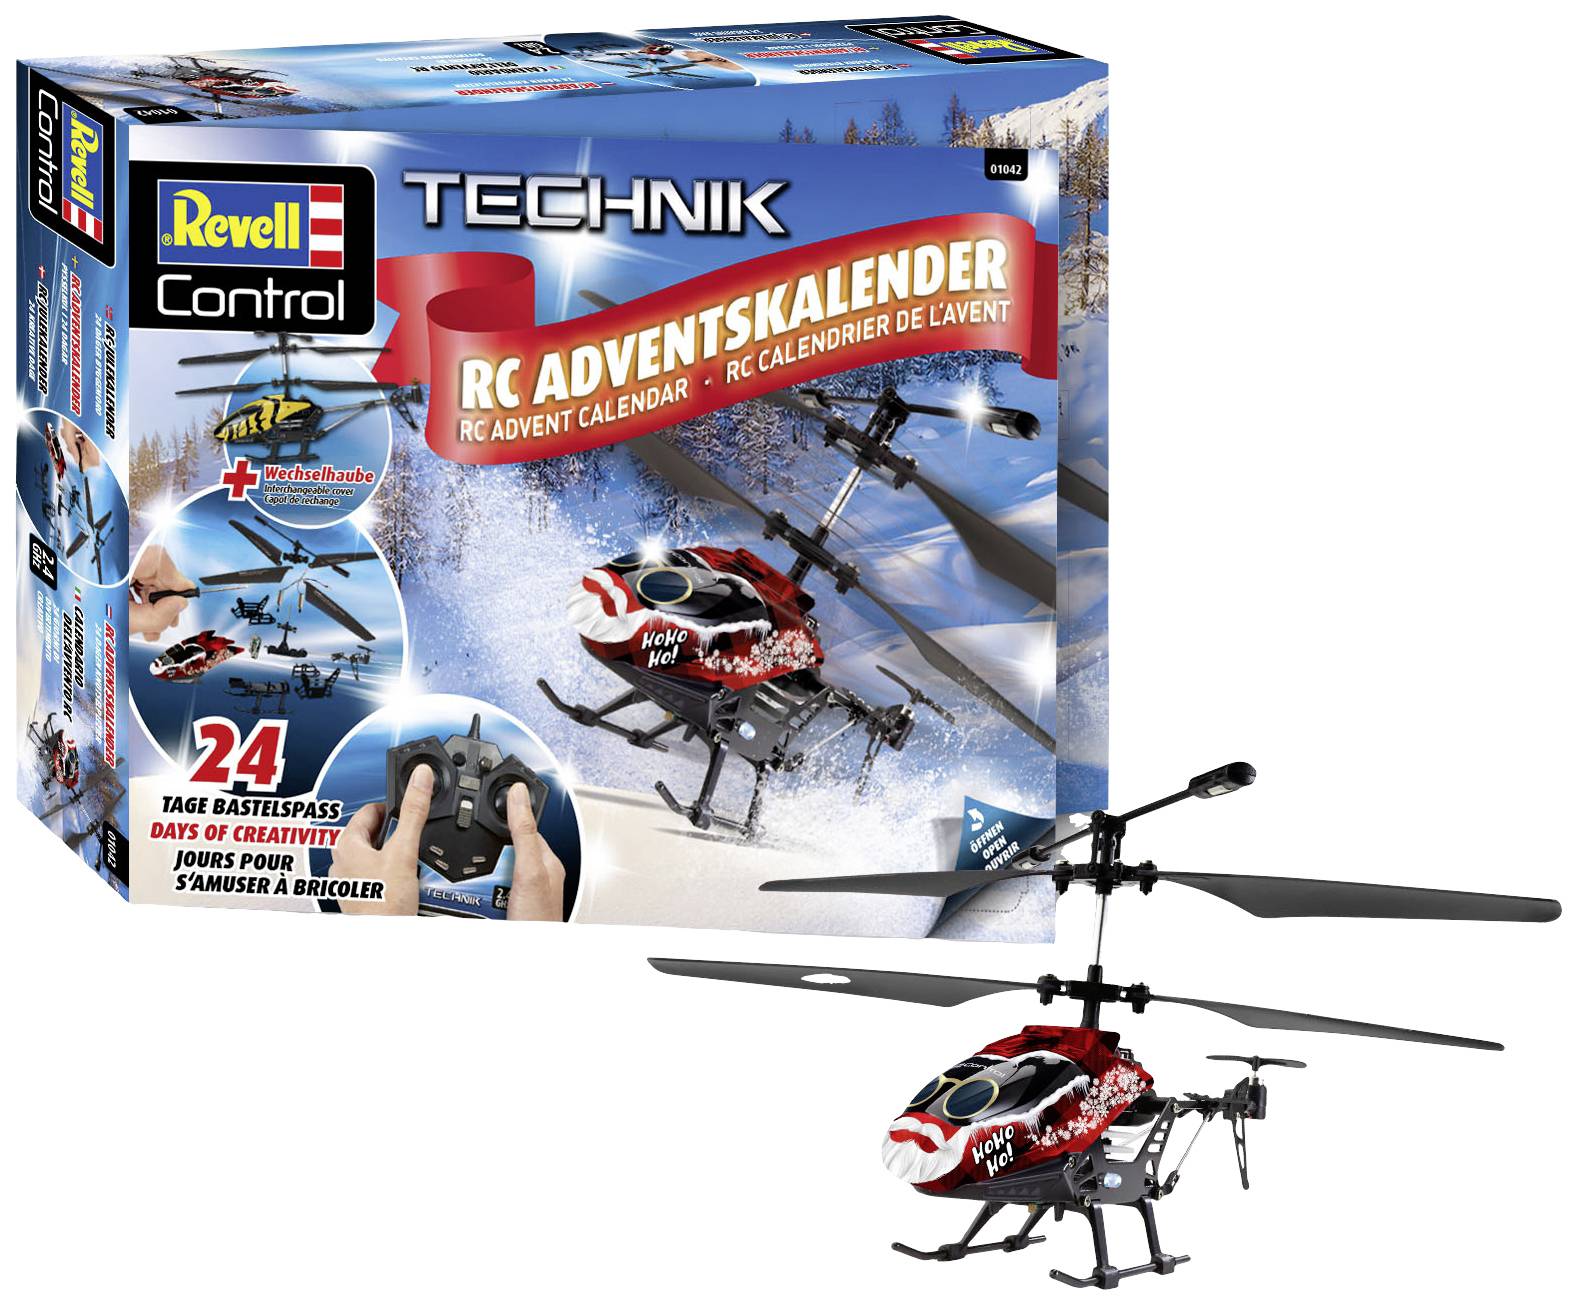 Revell Control Adventskalendar RC Helicopter RC helicopter Advent